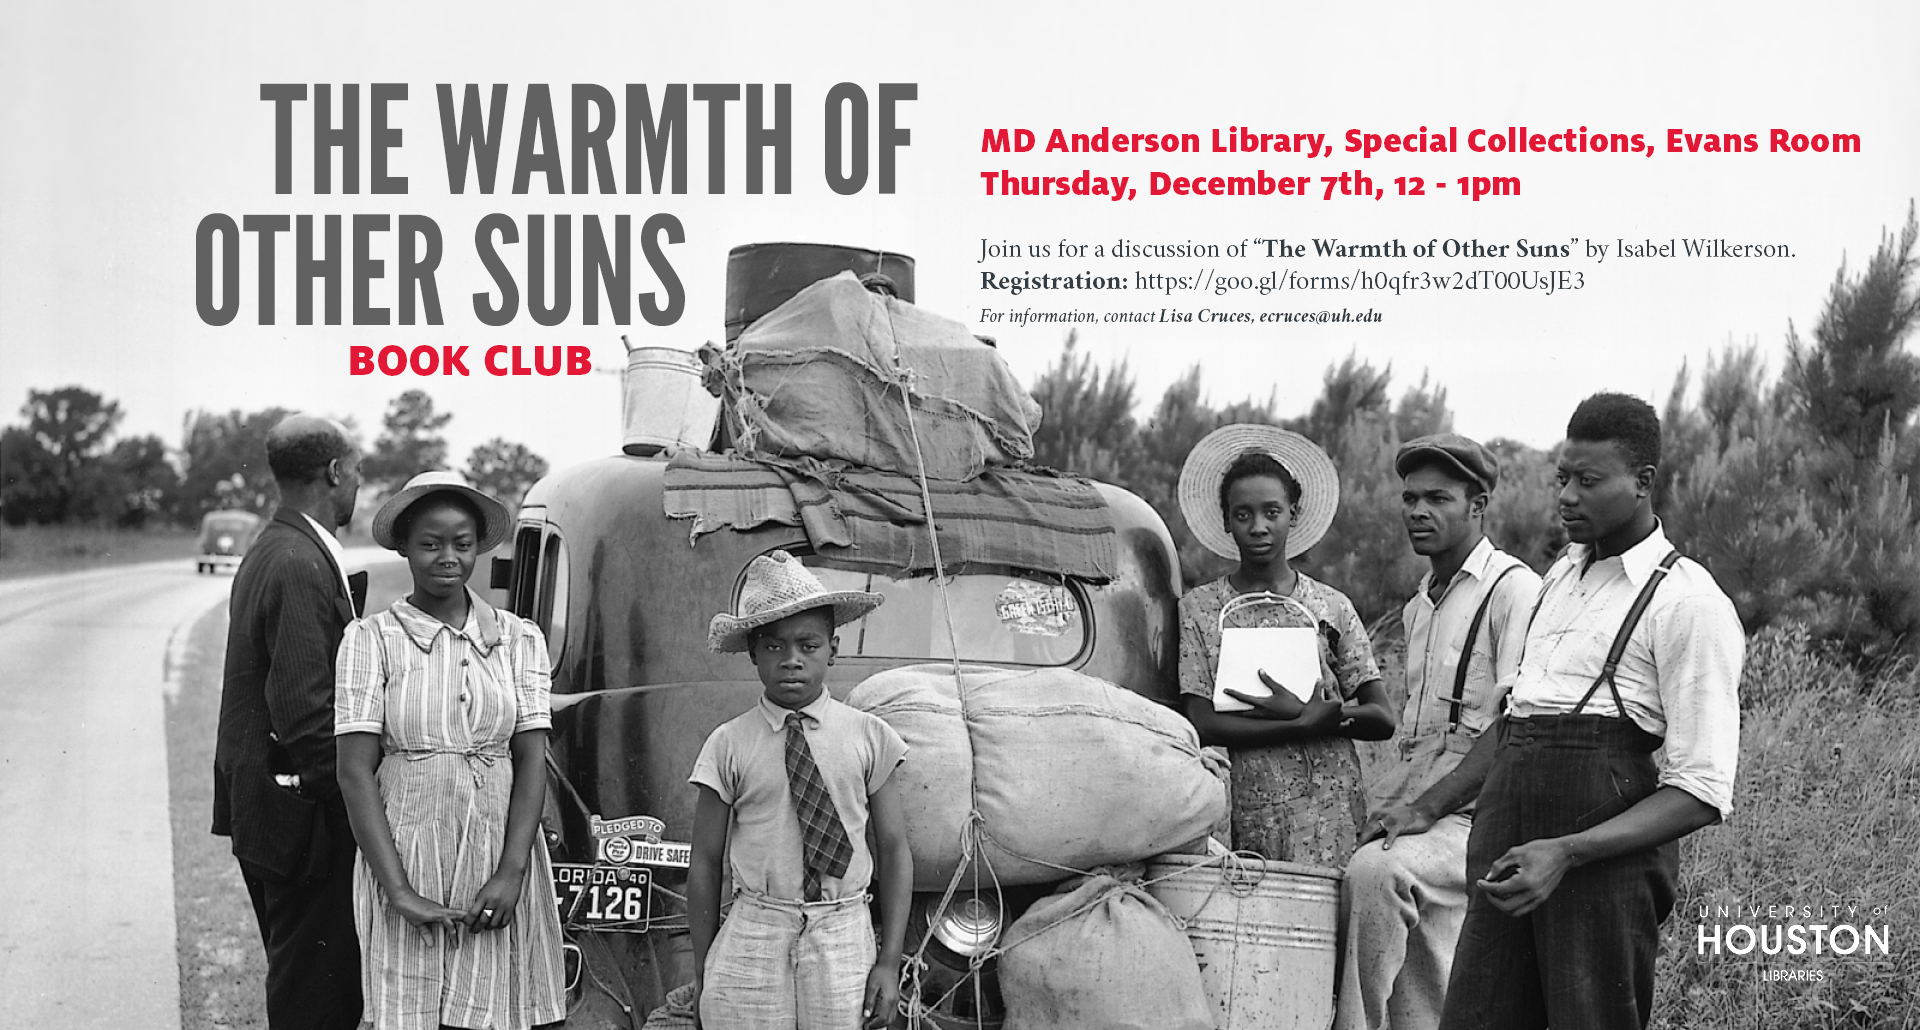 Join us on Thursday, December 7 for a discussion of "The Warmth of Other Suns."